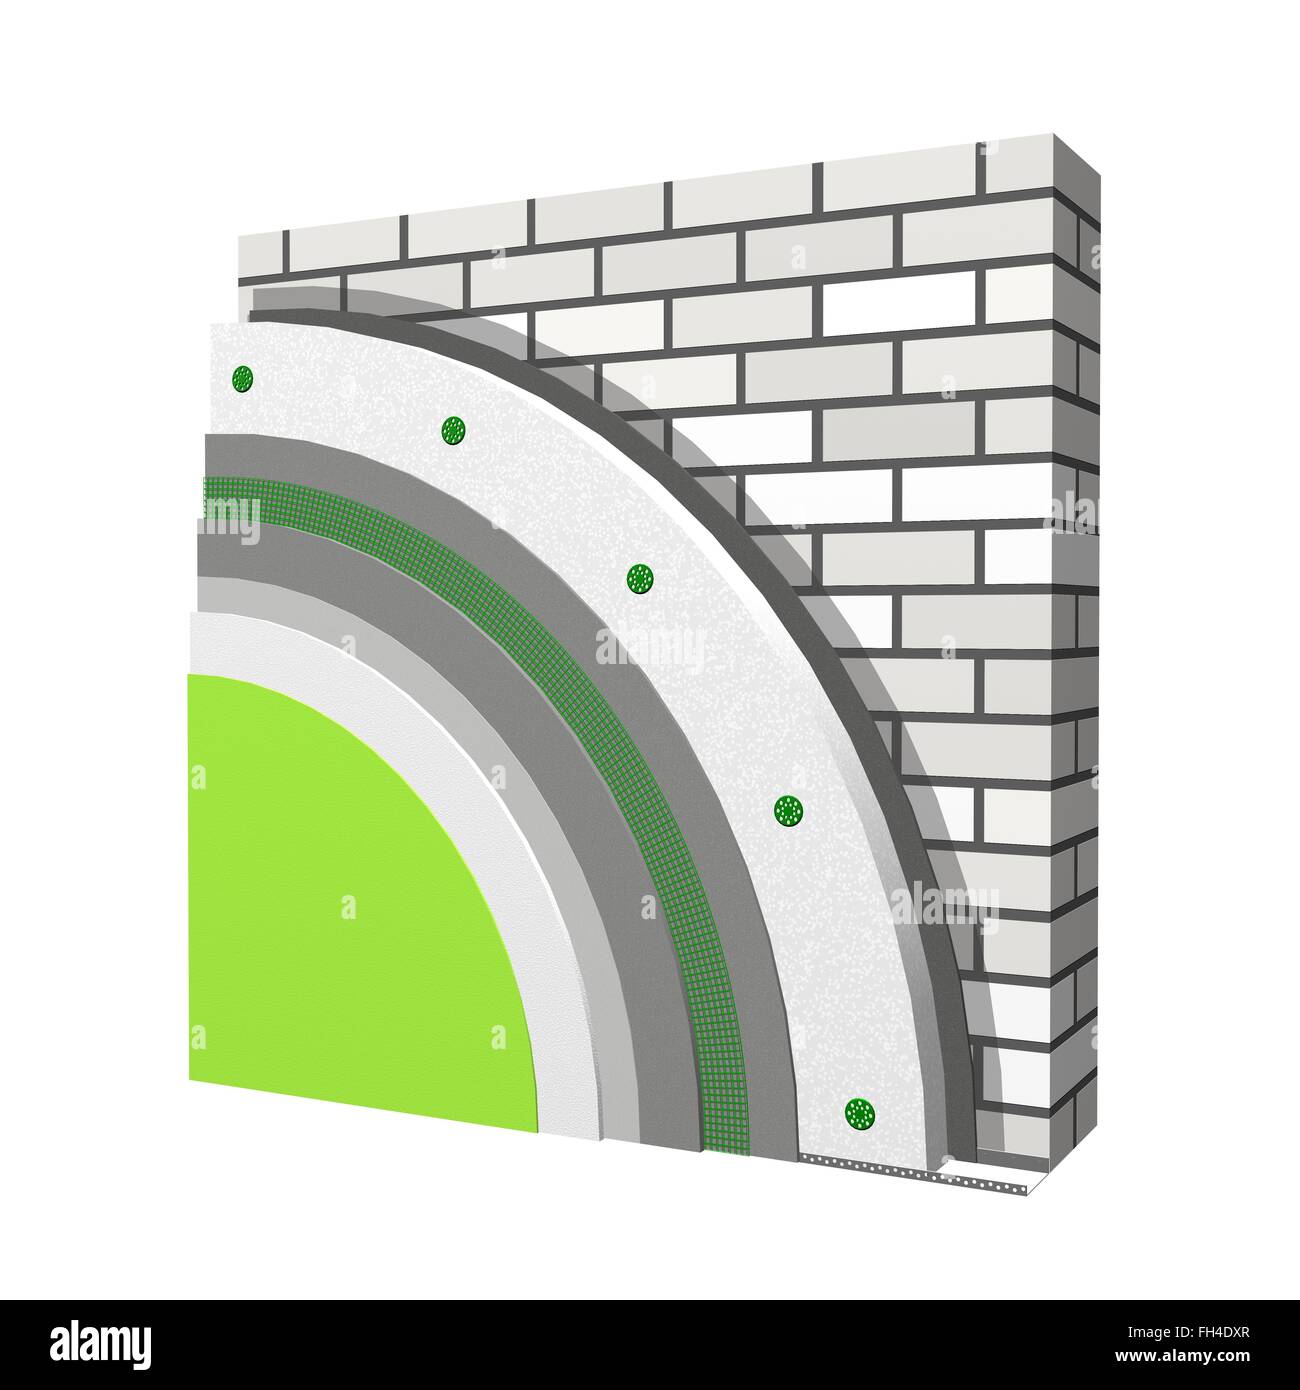 3D layered scheme of exterior wall insulation using polystyrene or styrofoam panels for thermal isolation. Stock Photo